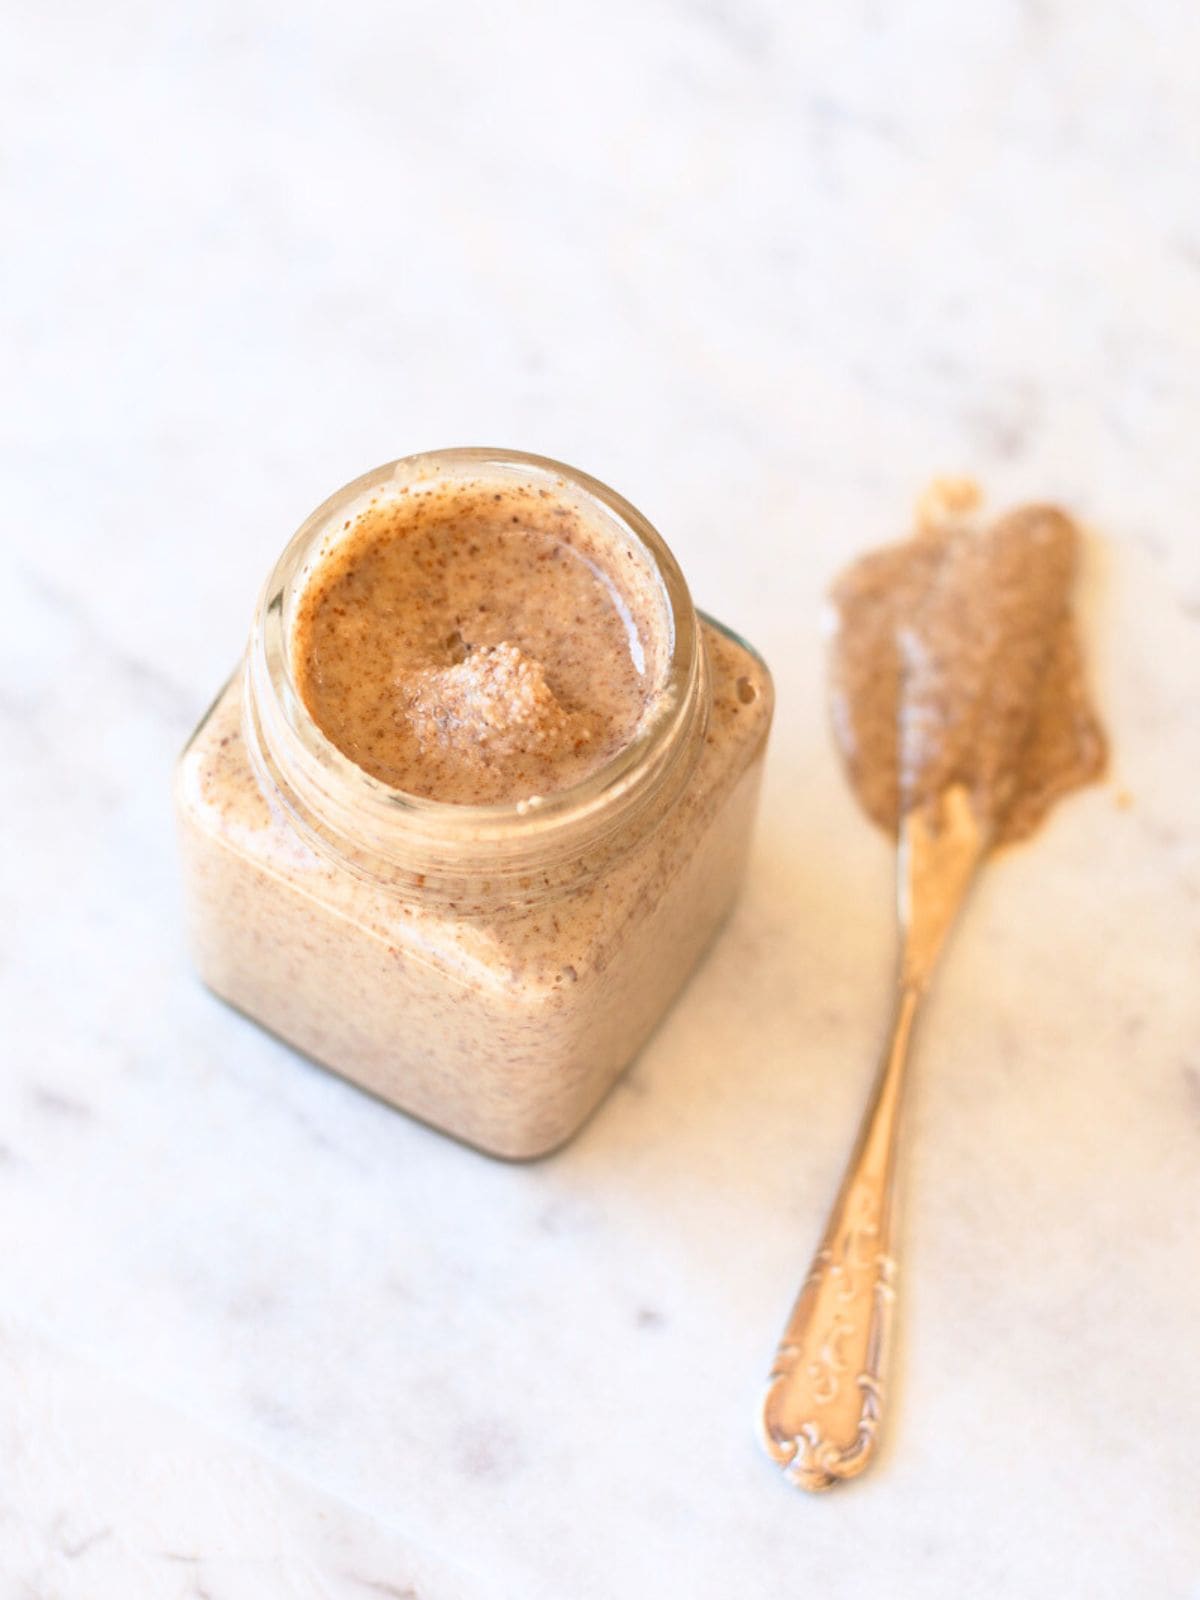 Image of homemade almond butter in a glass jar with a knife.